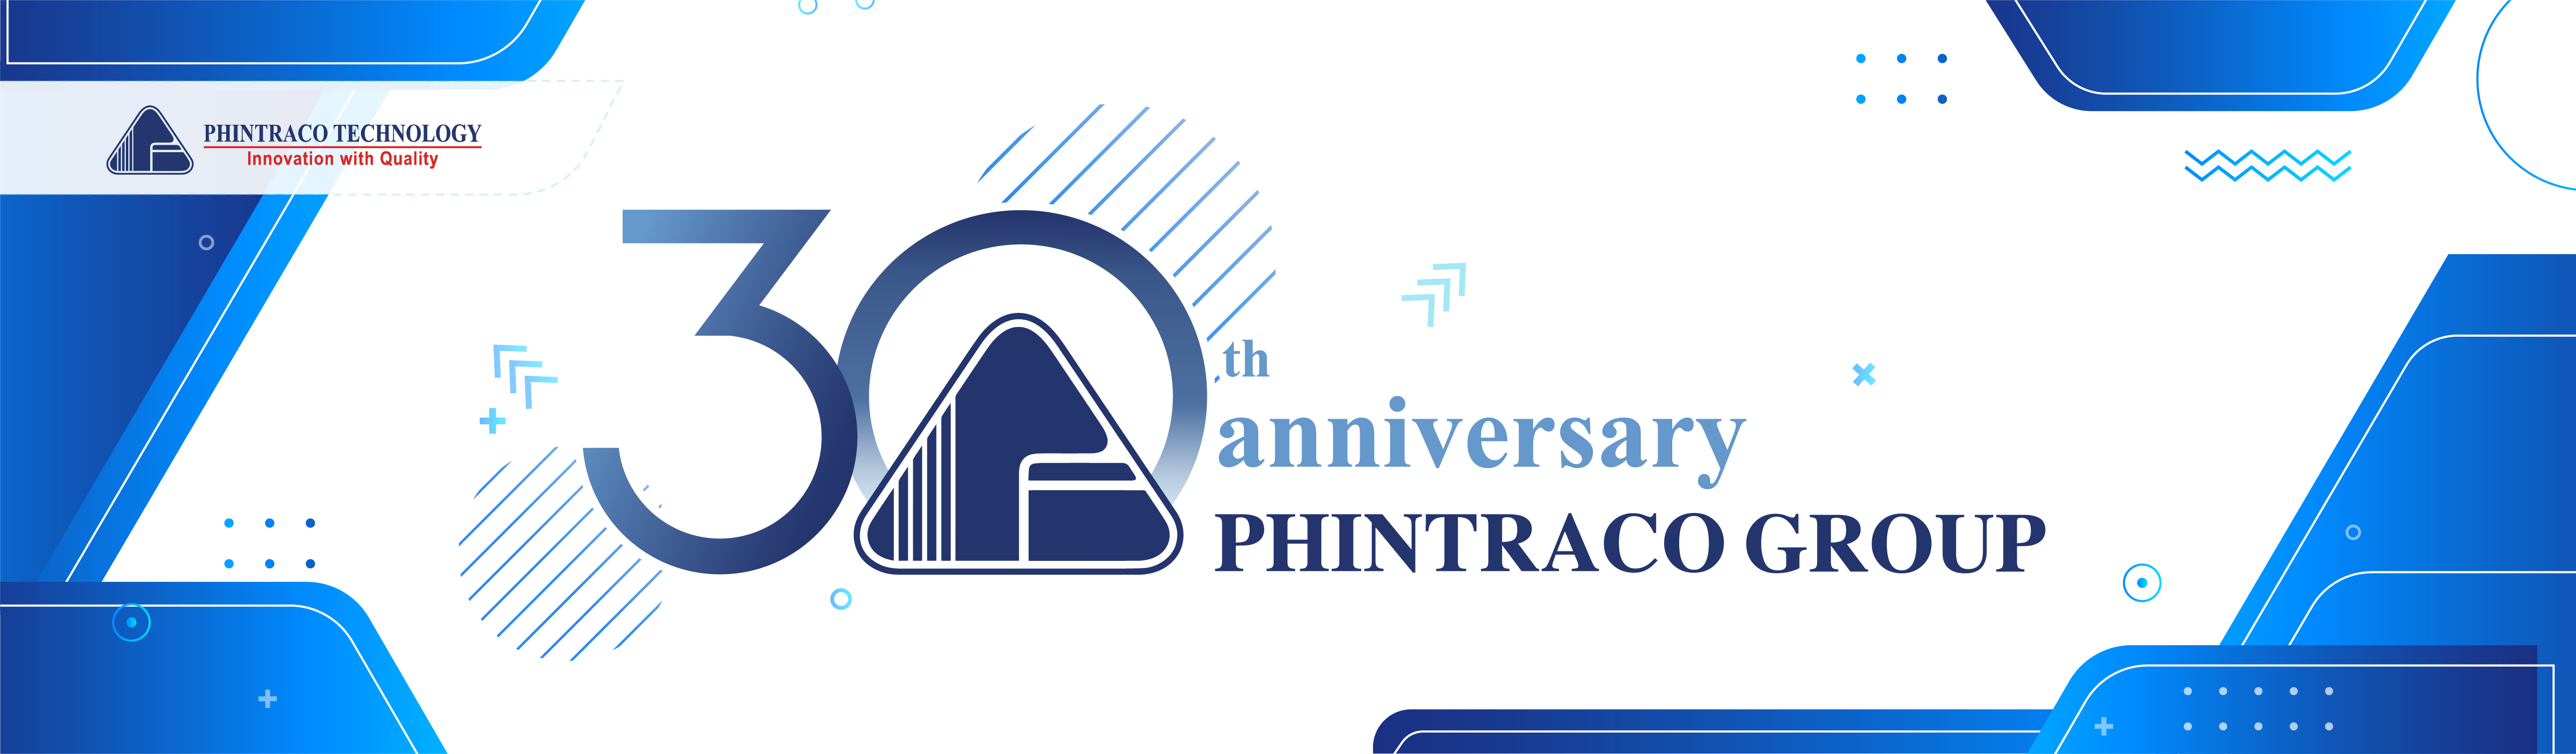 Celebrating 30th Anniversary, Phintraco Group Turns Challenges into New Opportunities to Innovate